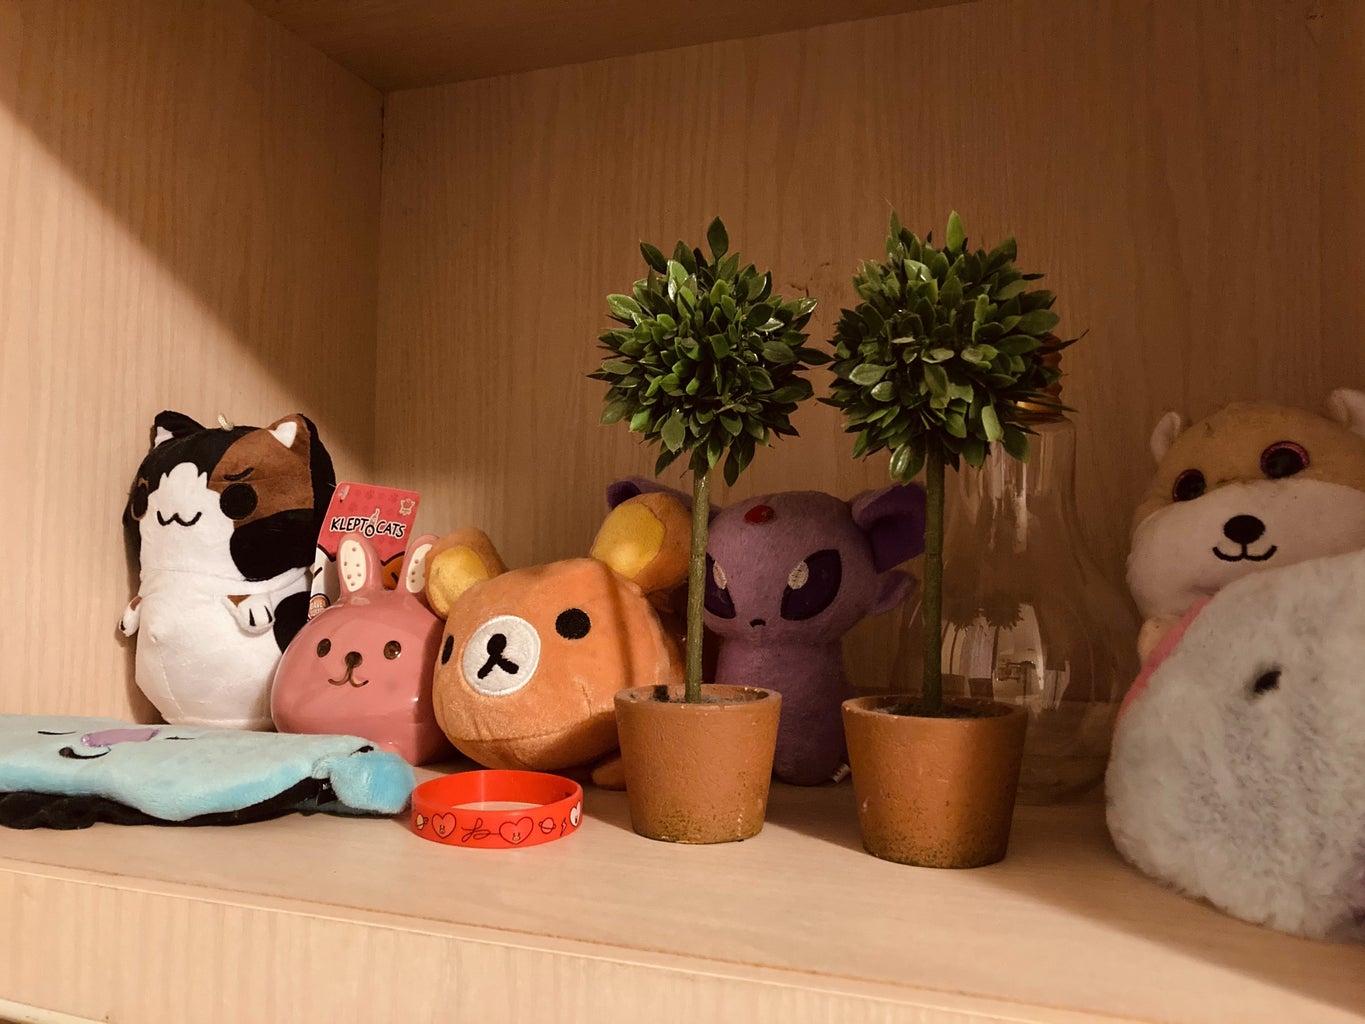 Photo from shelf of plushies and other items in room